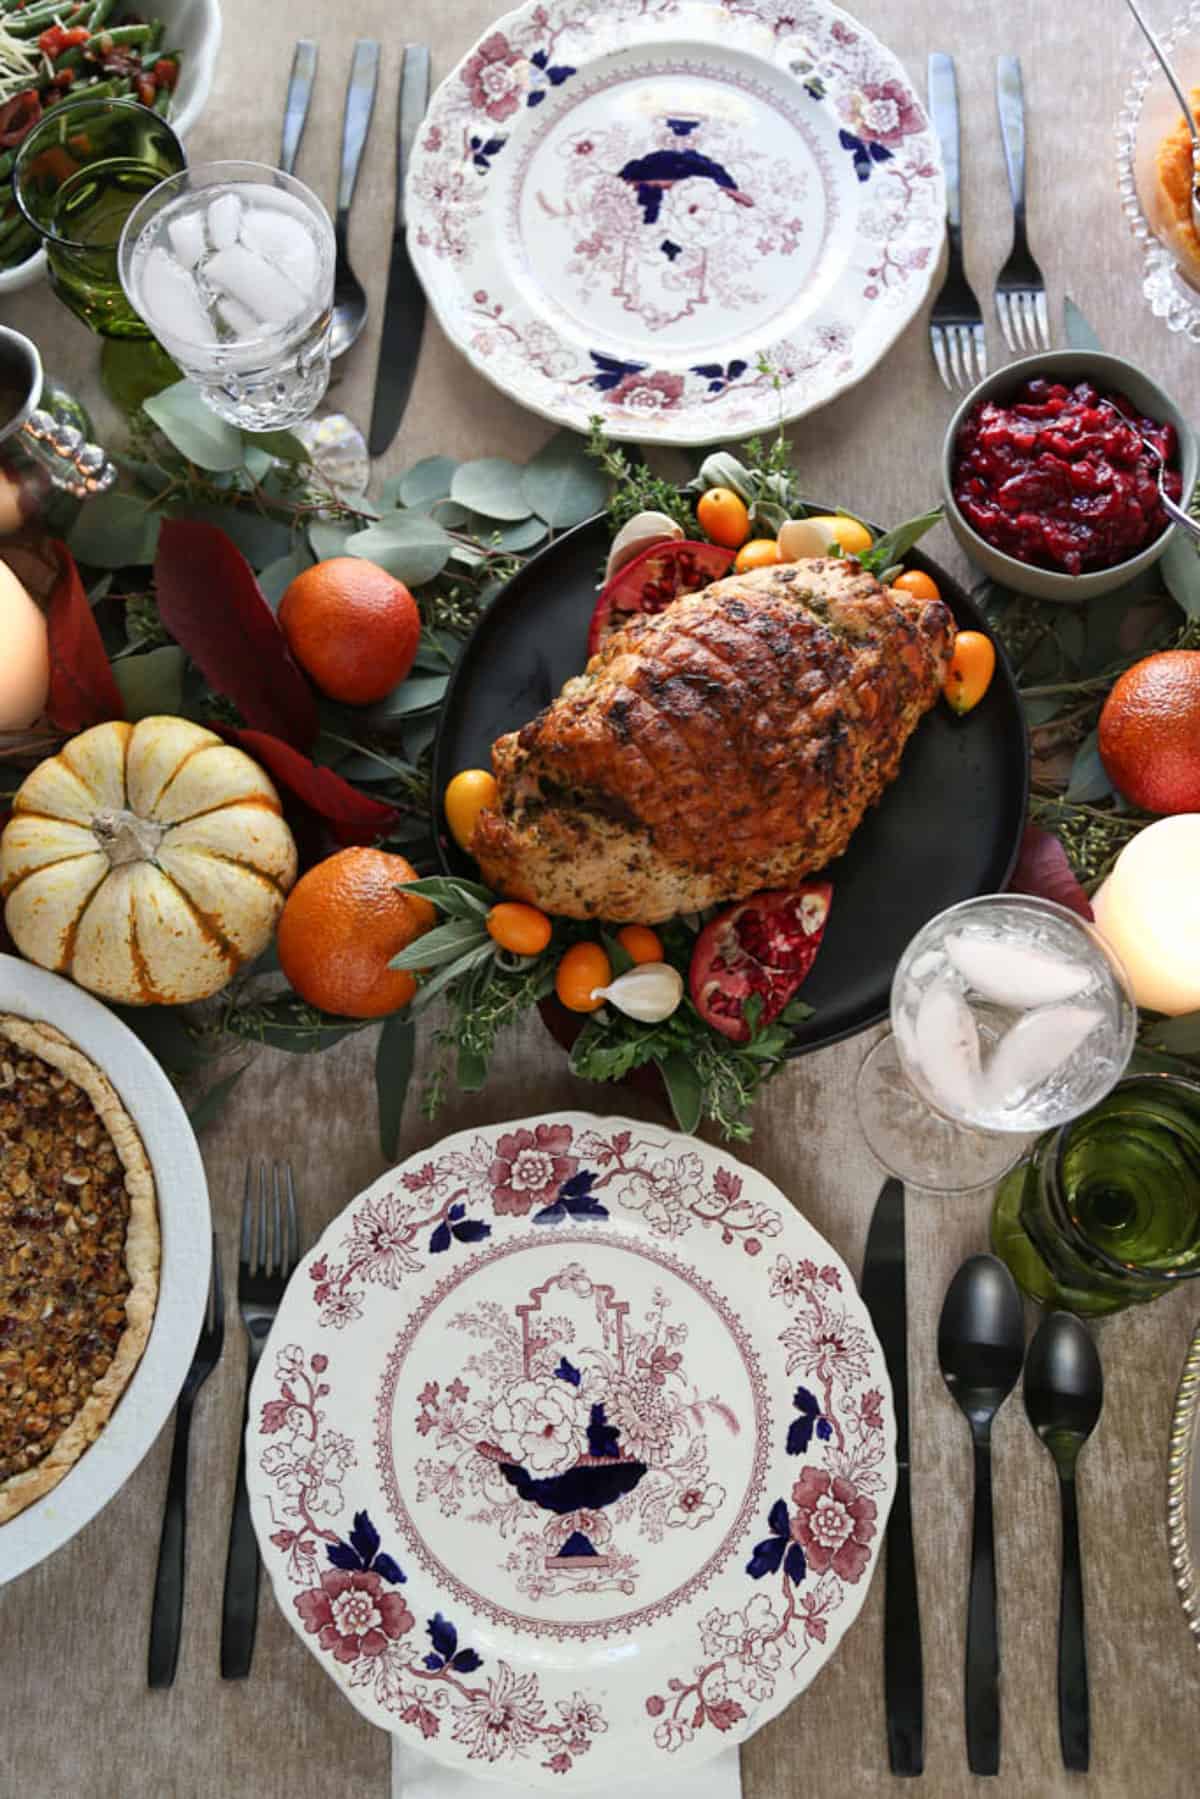 table set with china plates, mini pumpkins, blood oranges, and leaves, with a turkey breast on a black platter in the center.